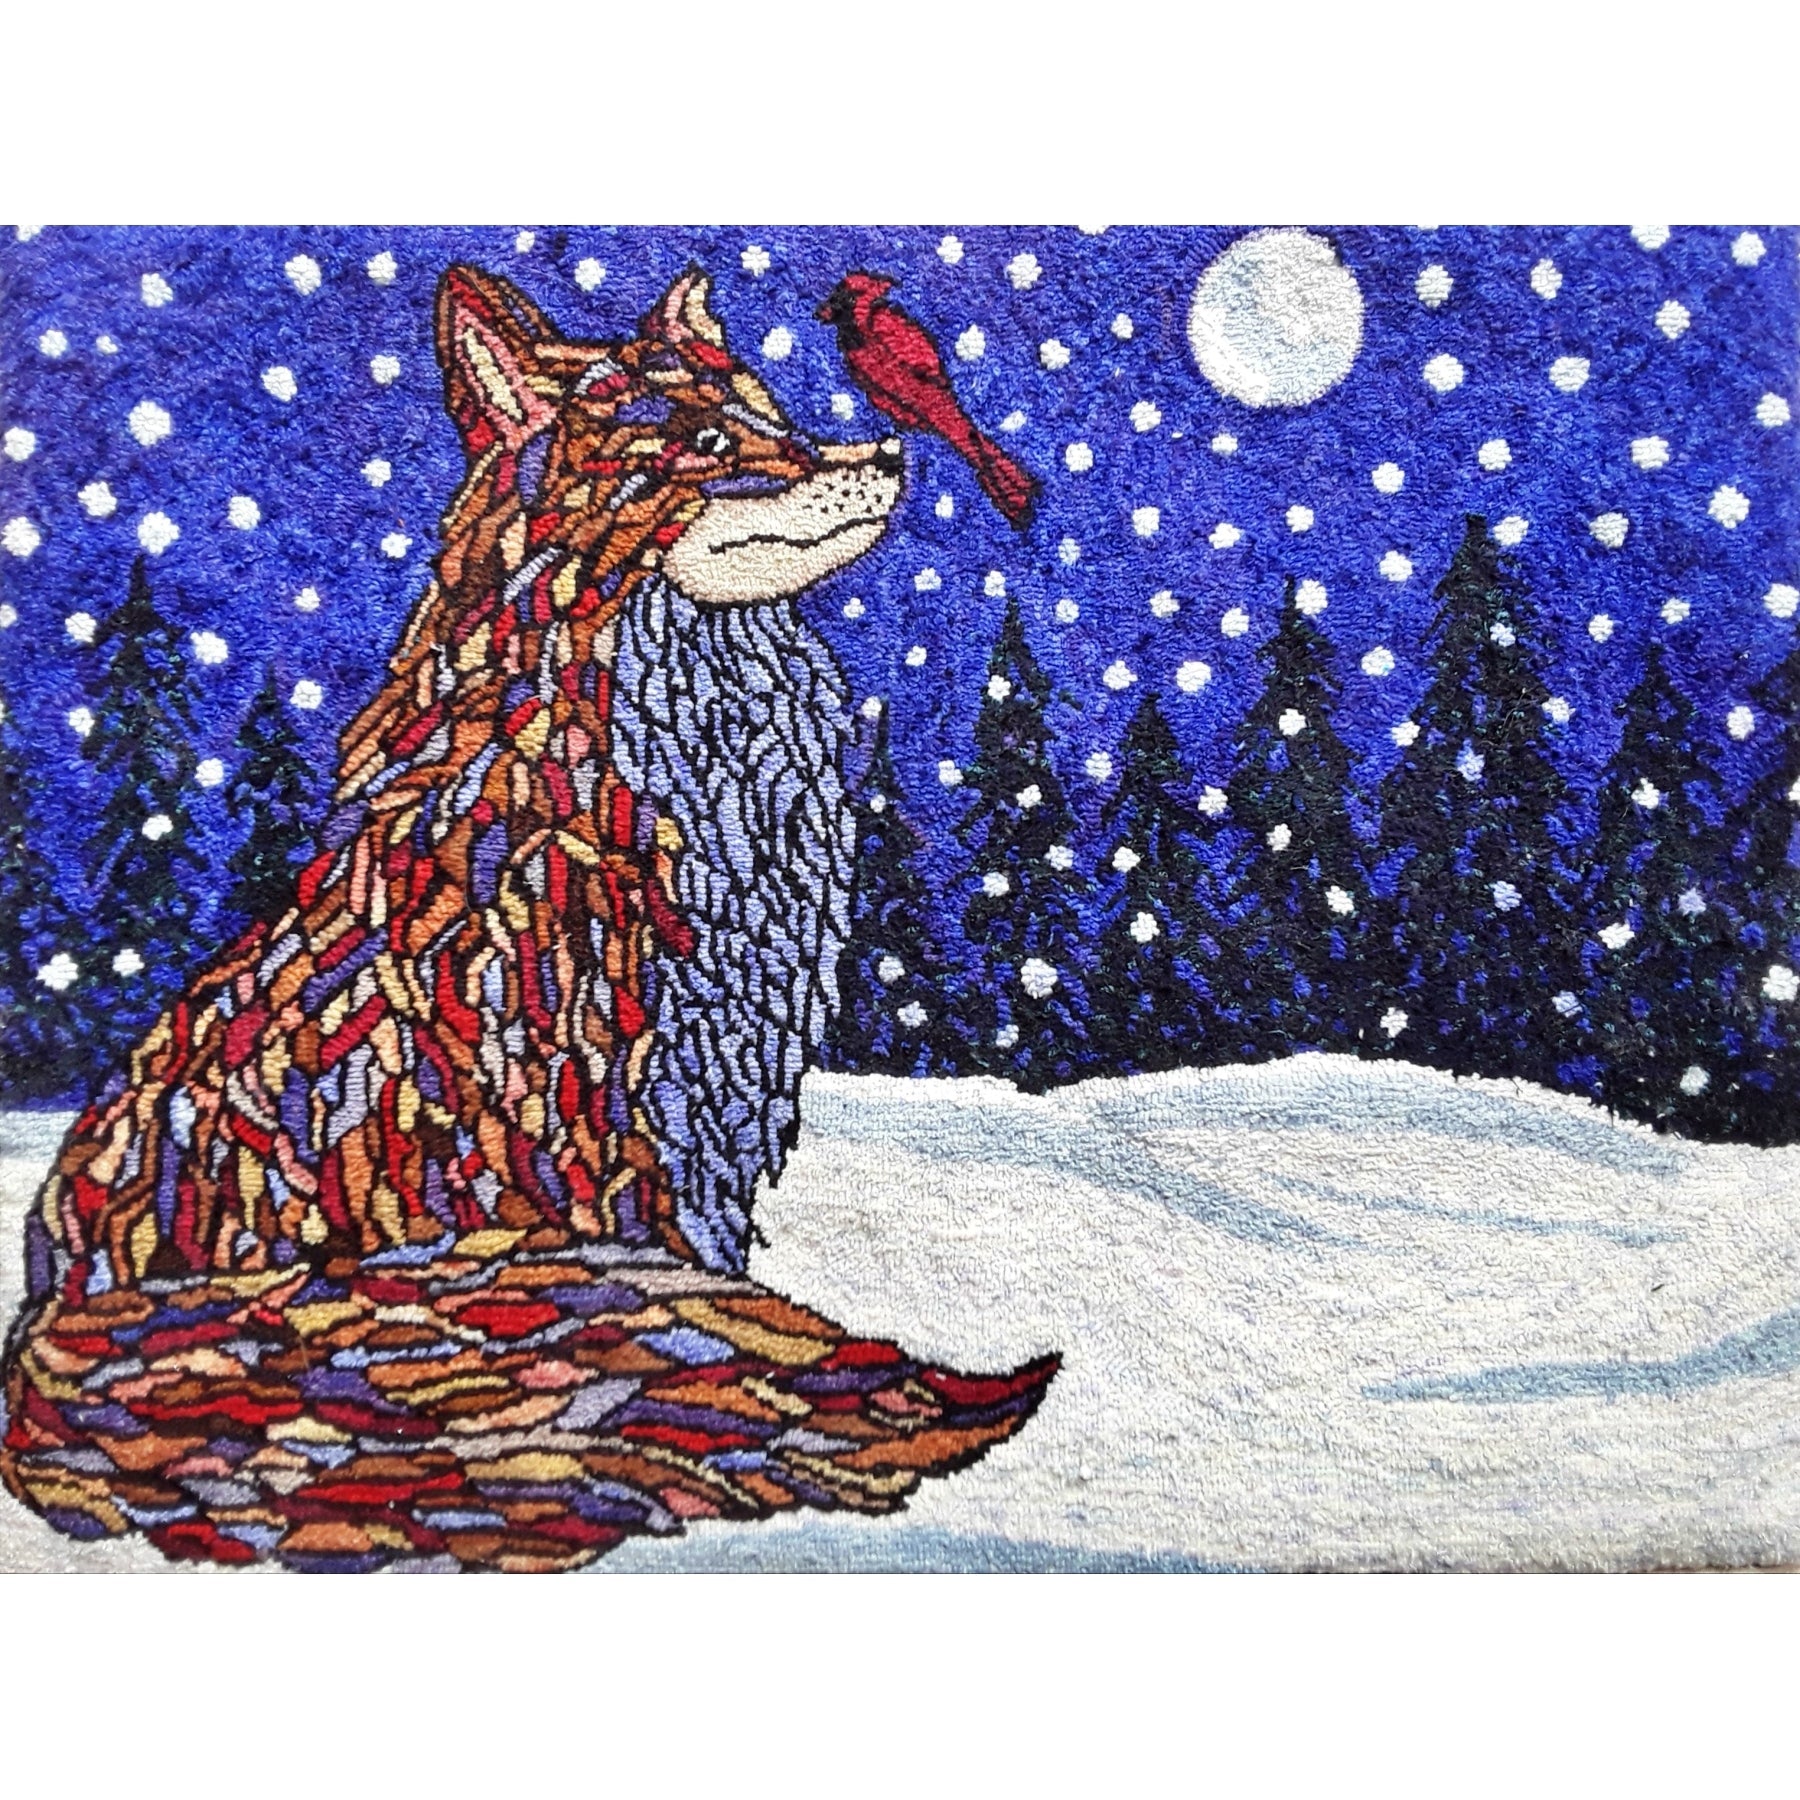 Winter Fox, rug hooked by Tricia Miller